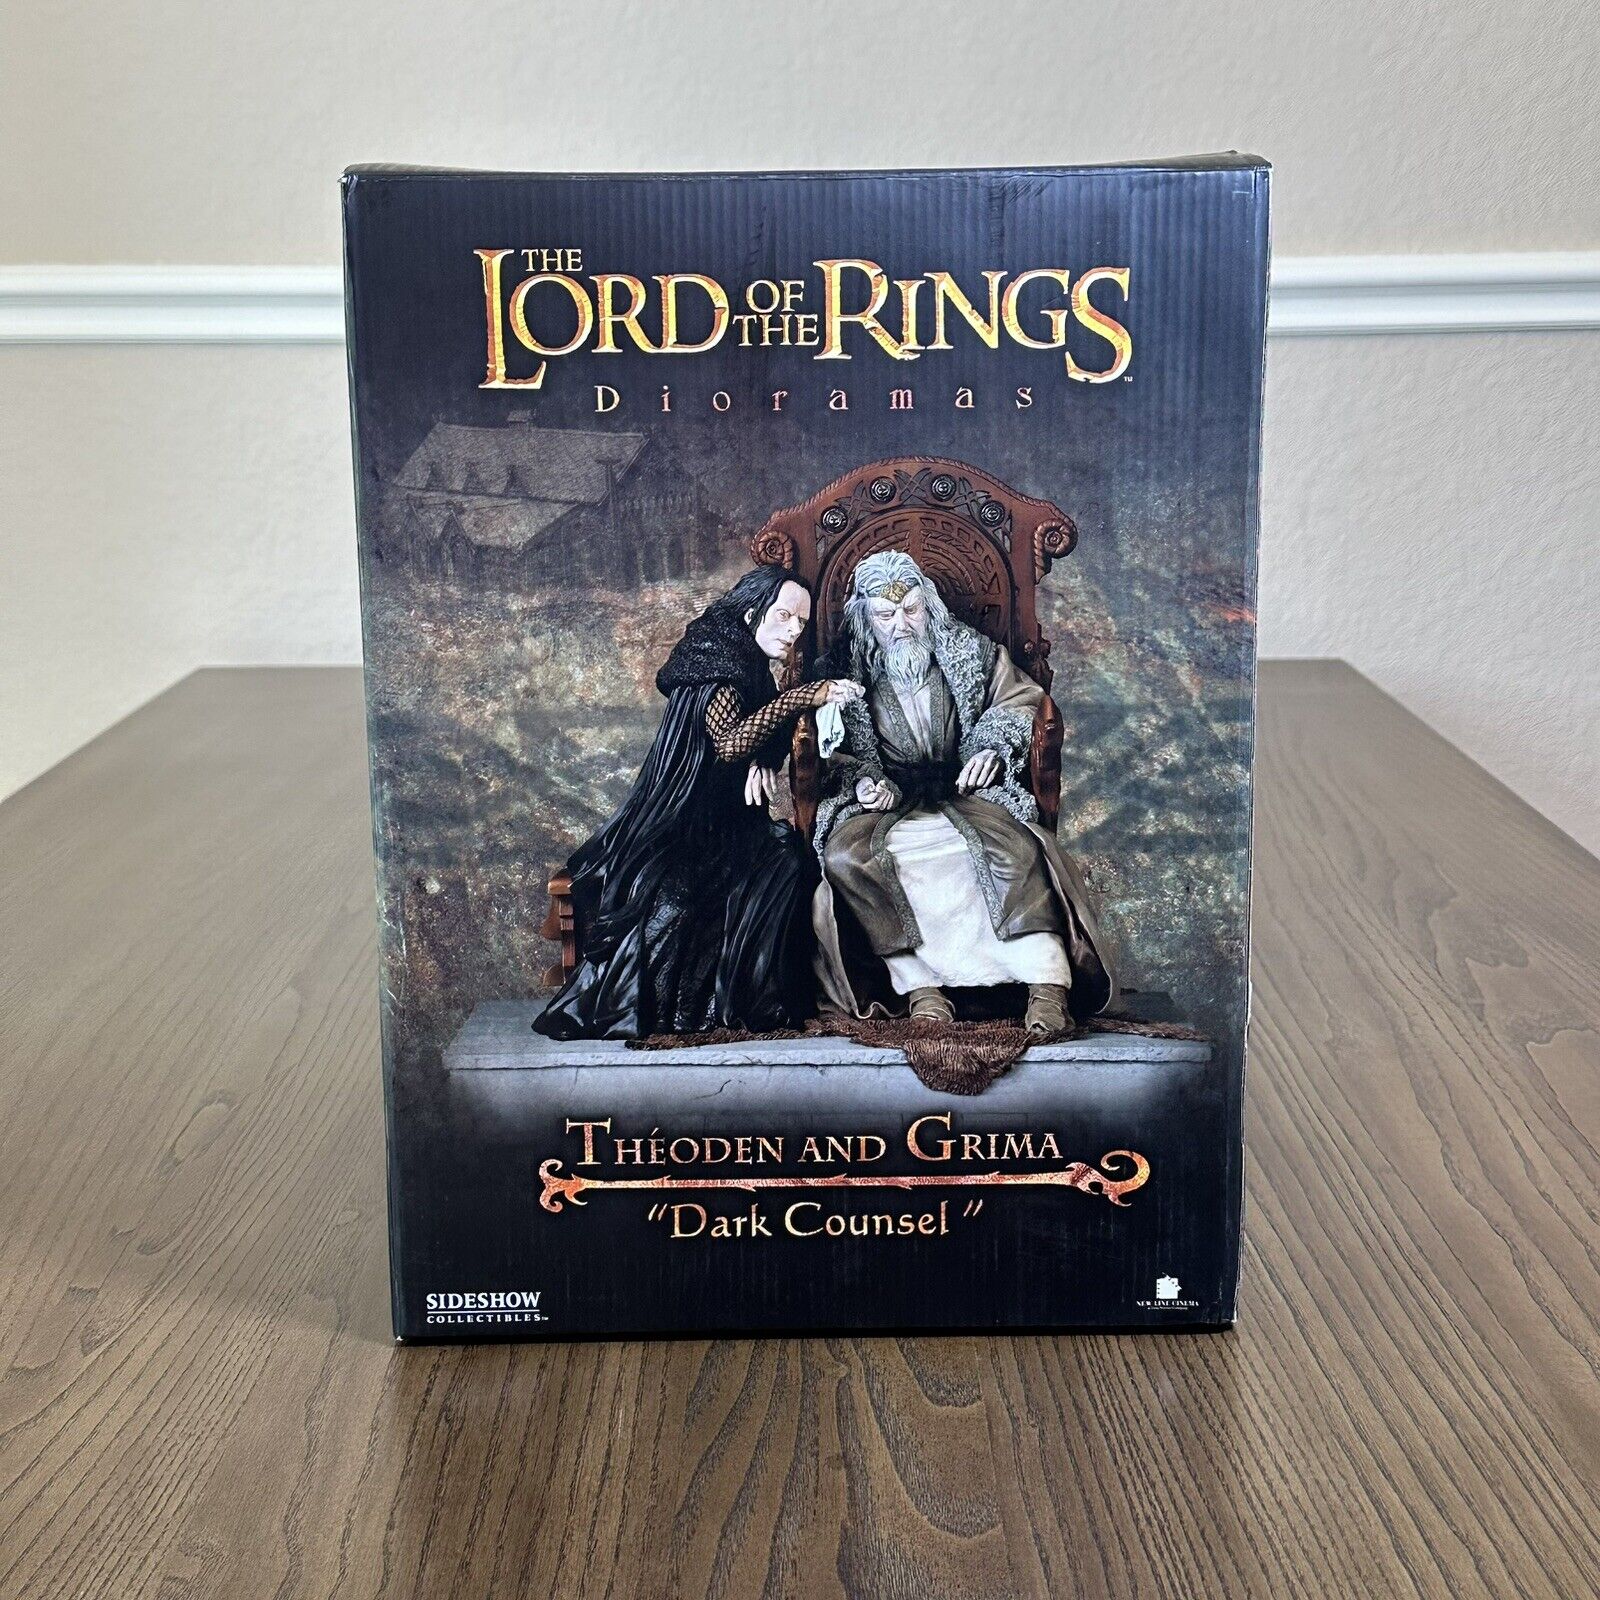 LOTR Dark Counsel – Théoden and Grima (The Lord of the Rings) SIDESHOW STATUE